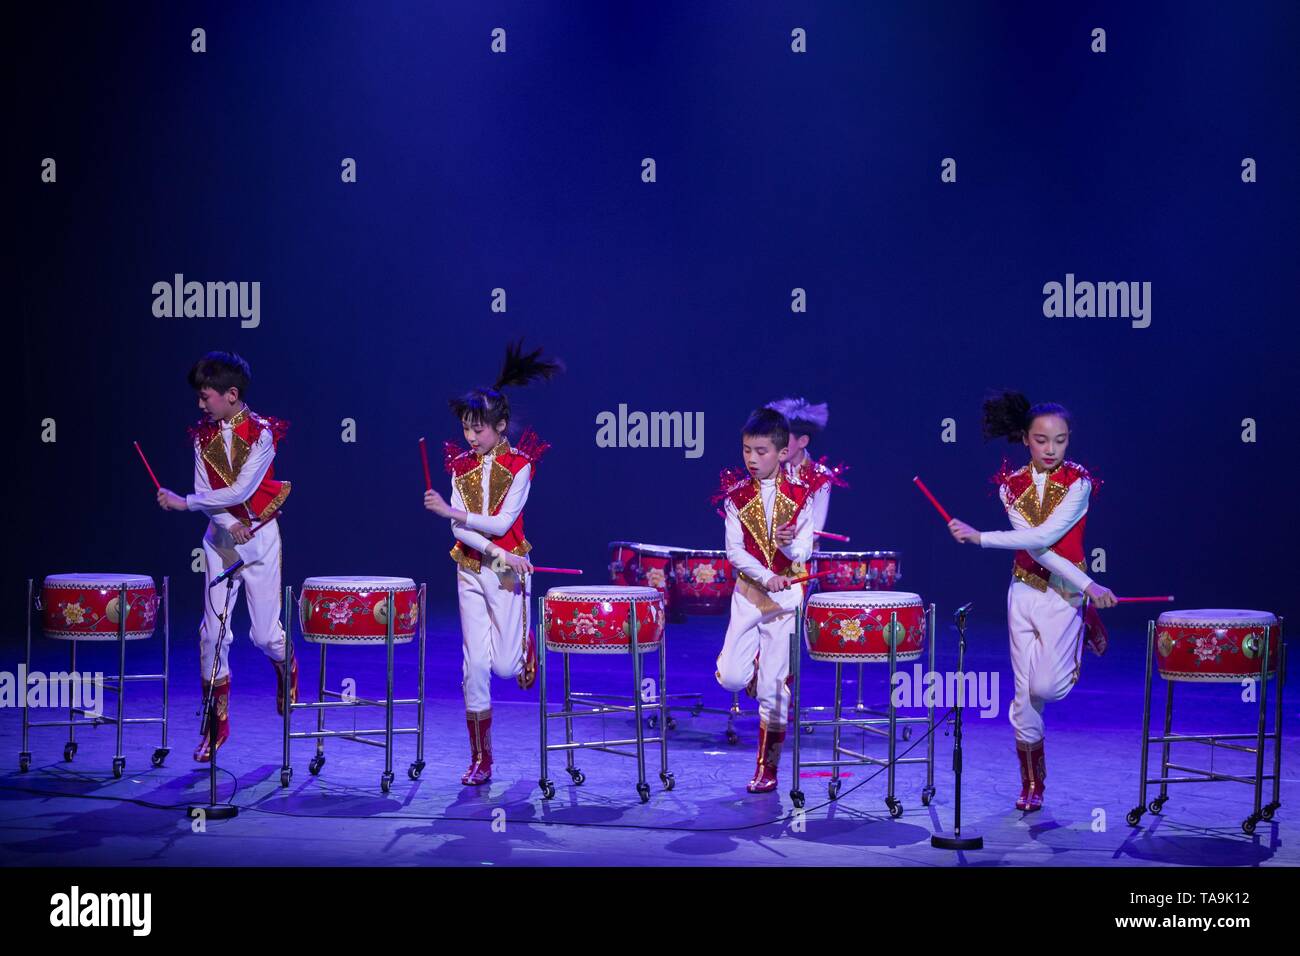 Helsinki, Finland. 21st May, 2019. Children from the Nanjing Little Red Flower Art Troupe of China perform at the Alexander Theatre in Helsinki, Finland, May 21, 2019. Credit: Matti Matikainen/Xinhua/Alamy Live News Stock Photo